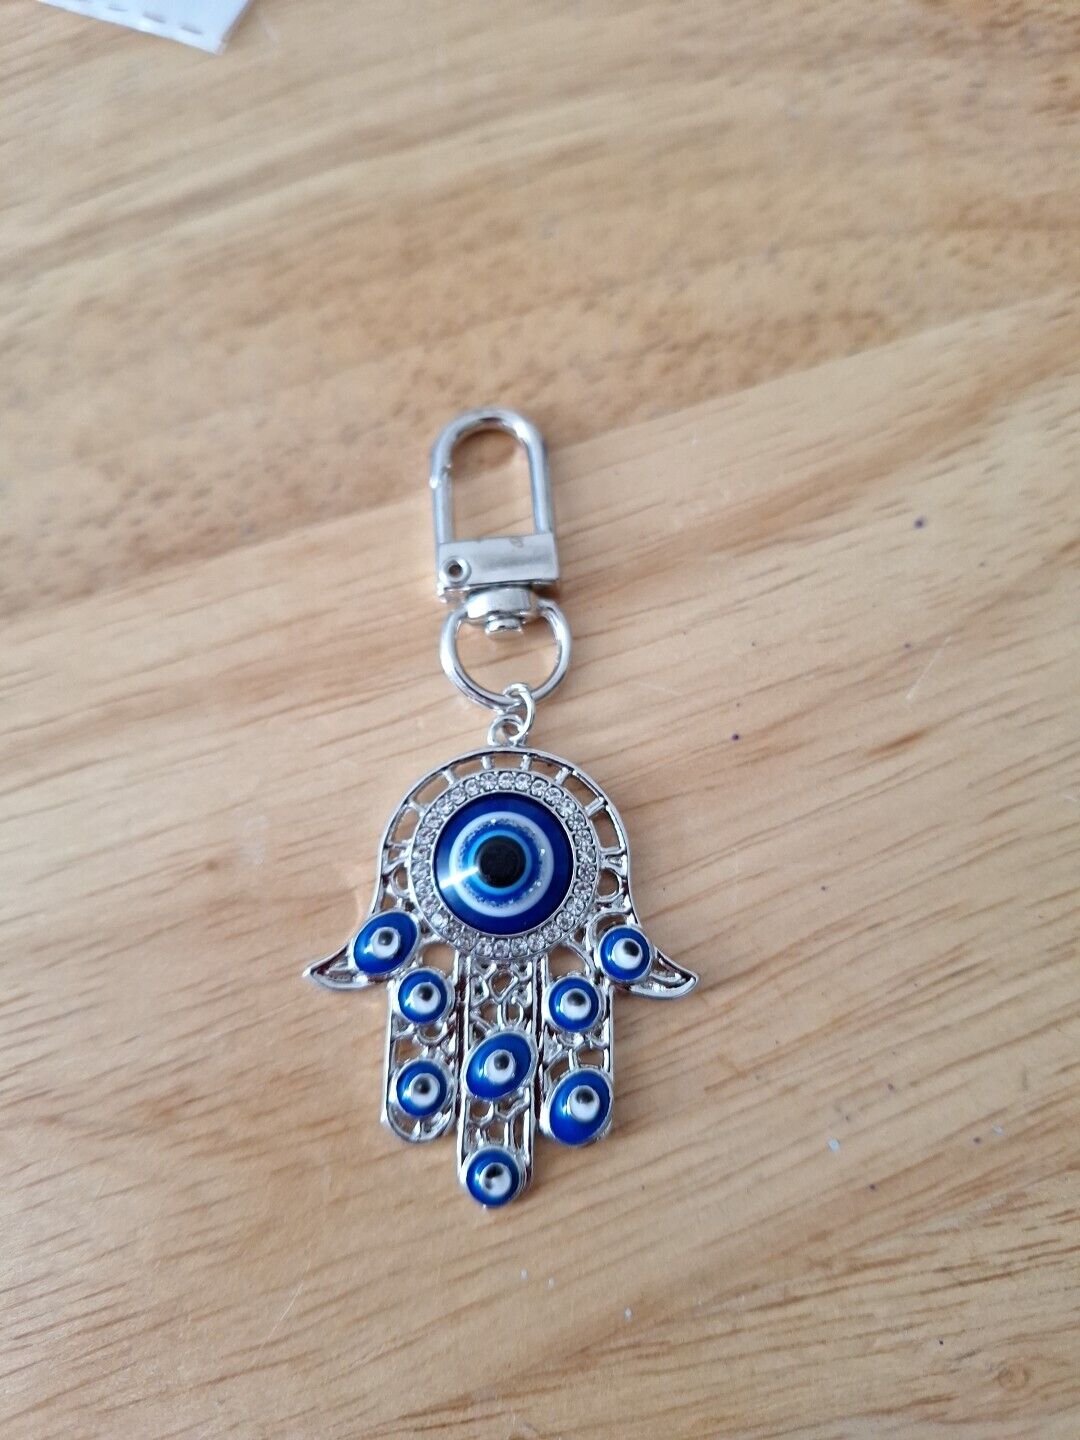 EVIL EYE KEYCHAIN/ Protection/ Fortune/ Good Luck